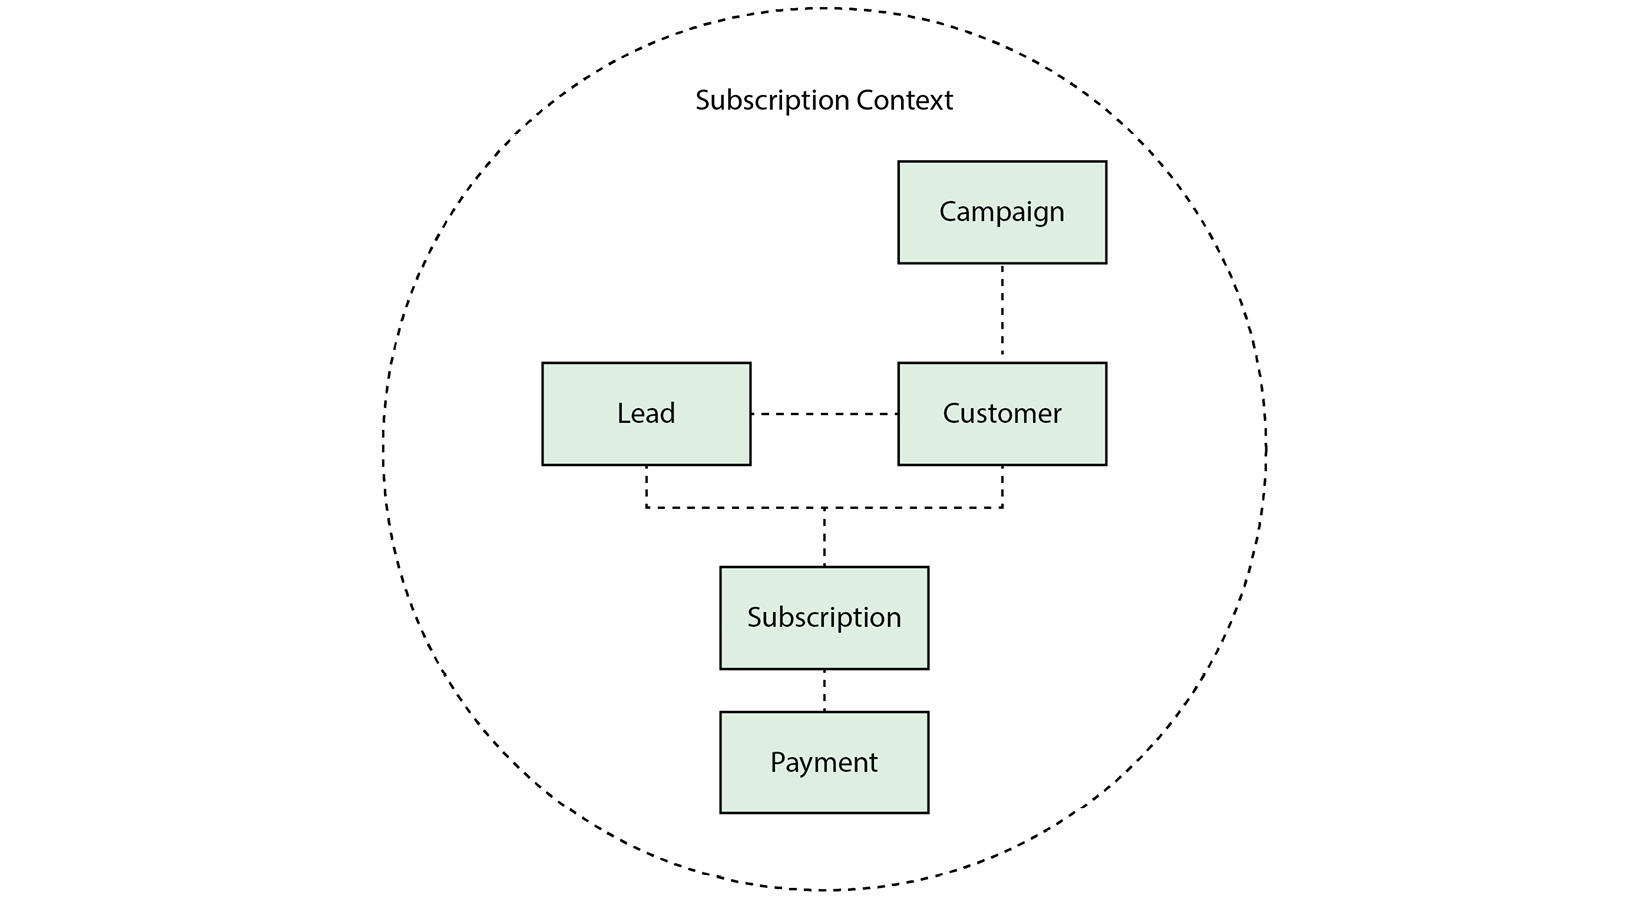 Figure 2.2 – A domain map of our subscription context and how different objects are related
